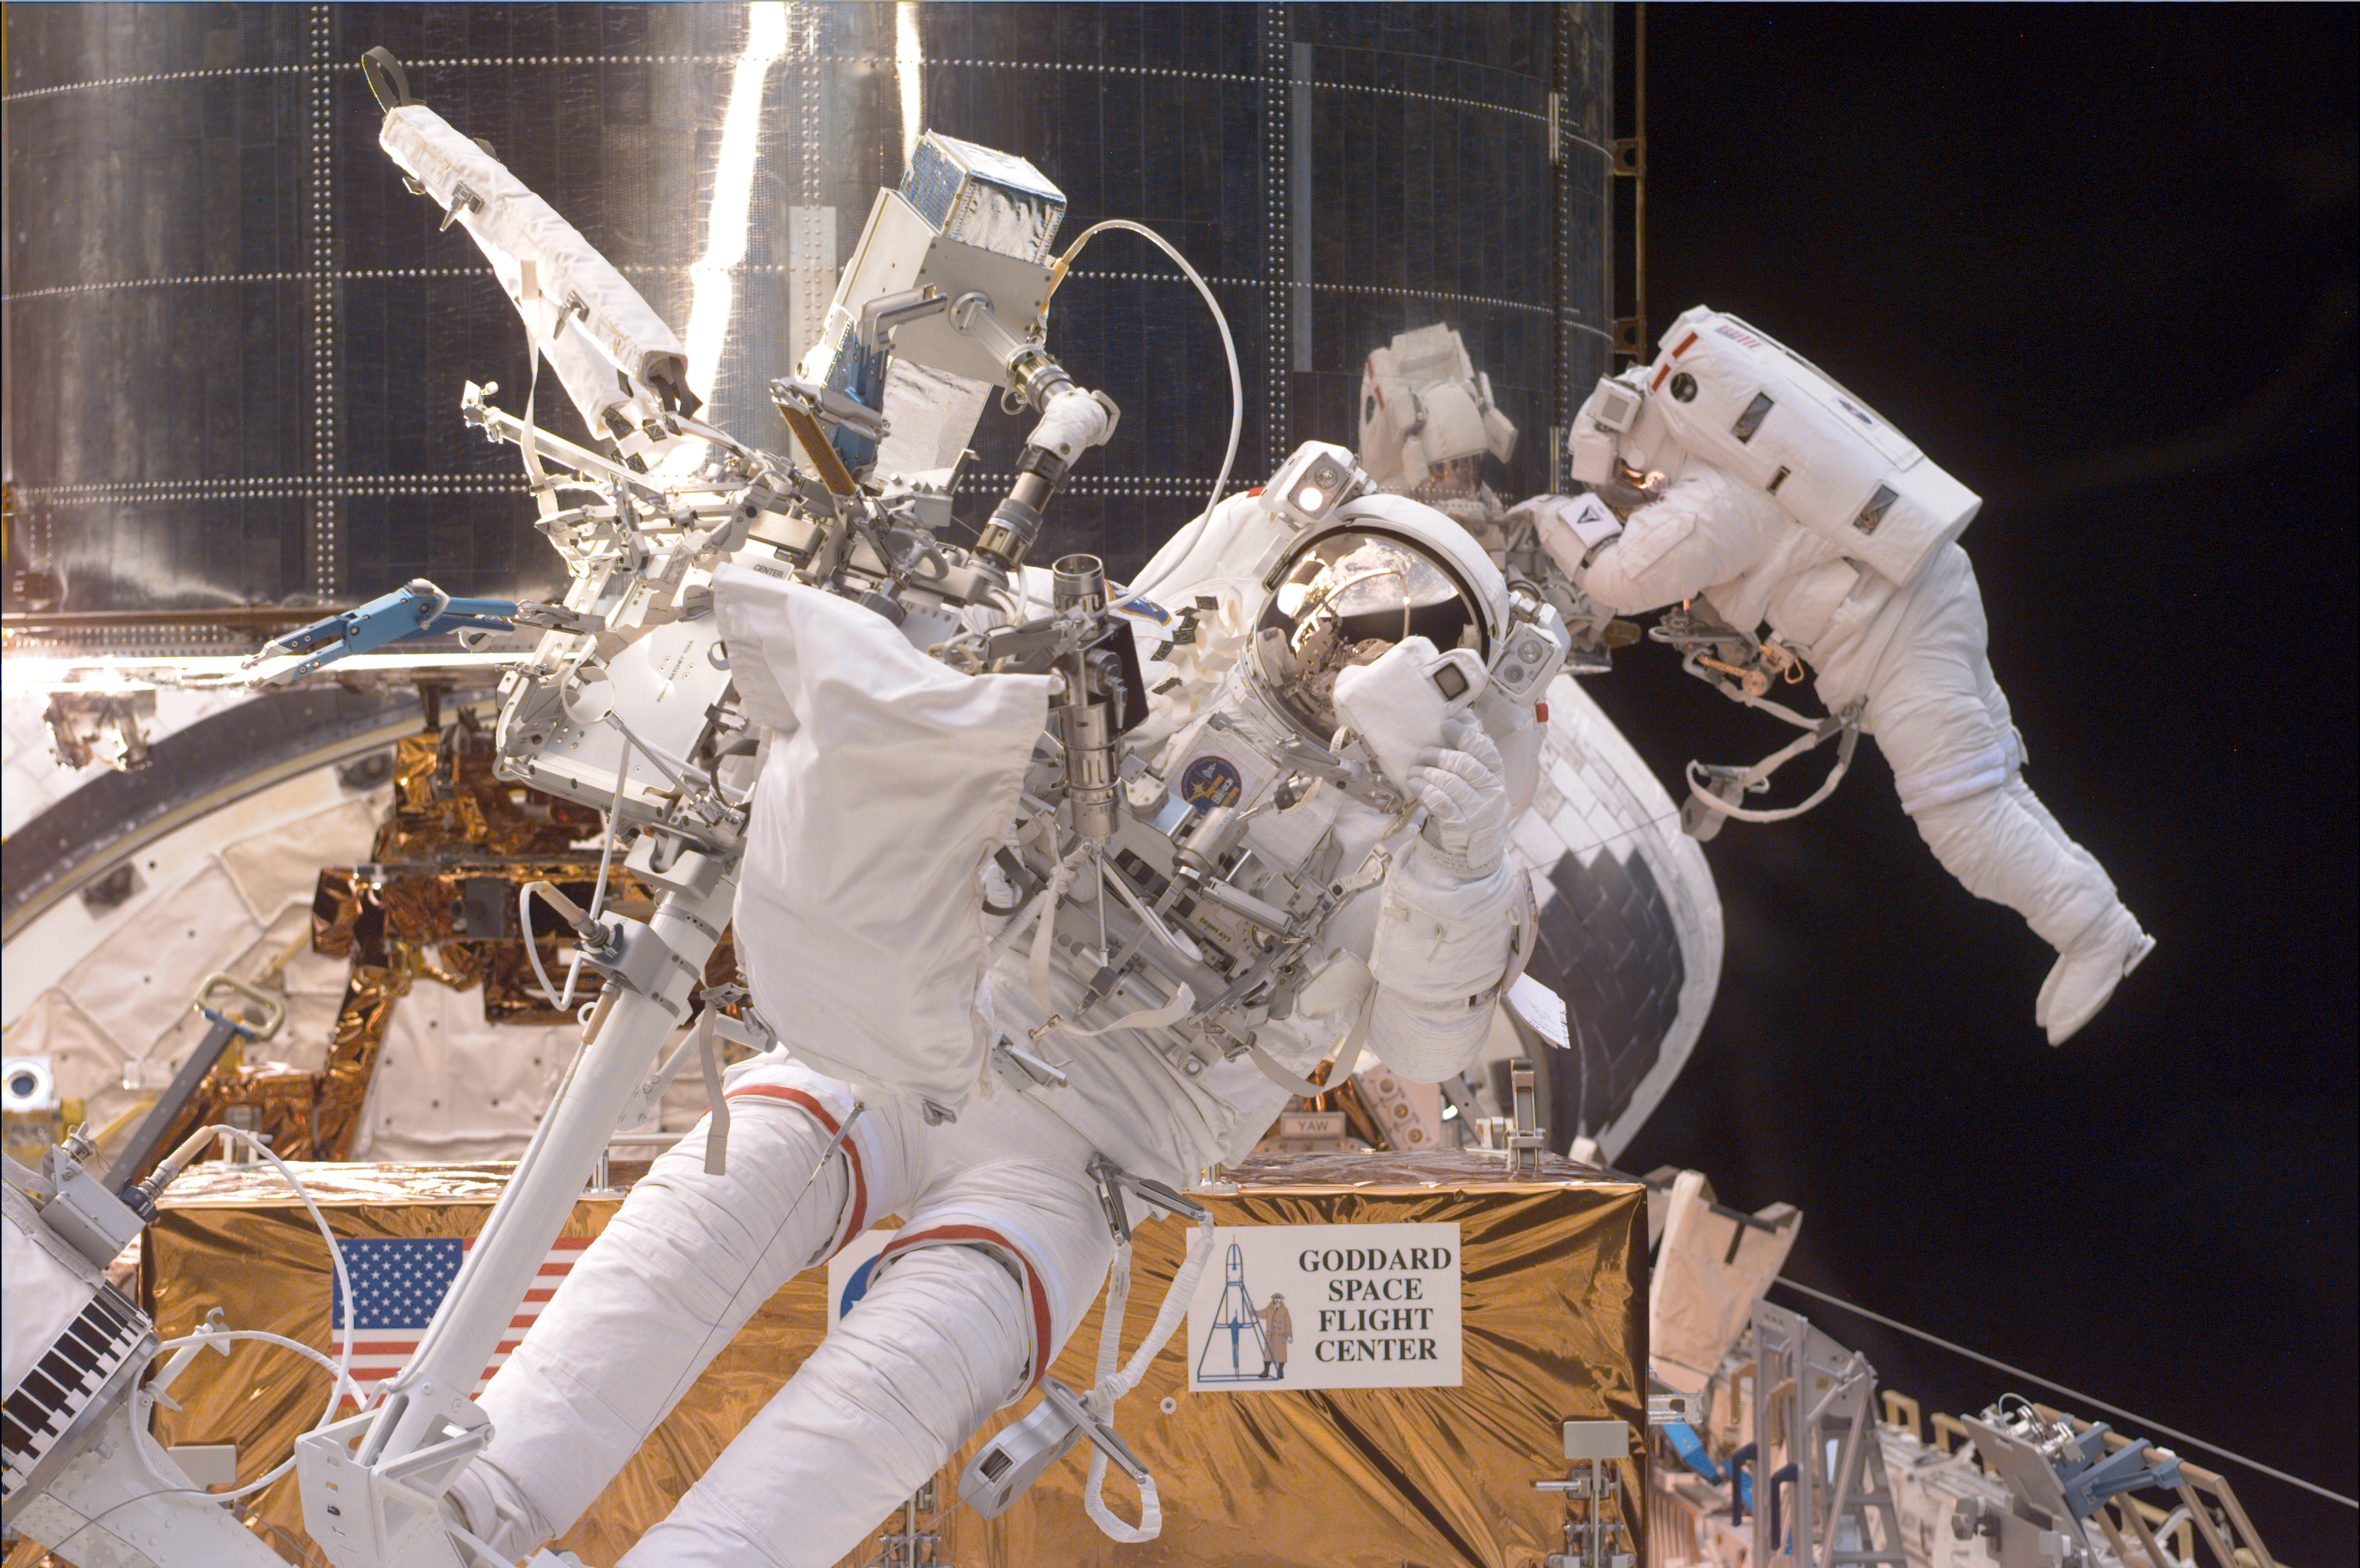 One astronaut is at the bottom of Hubble while the other is on the end of the shuttle's robotic arm with a camera.